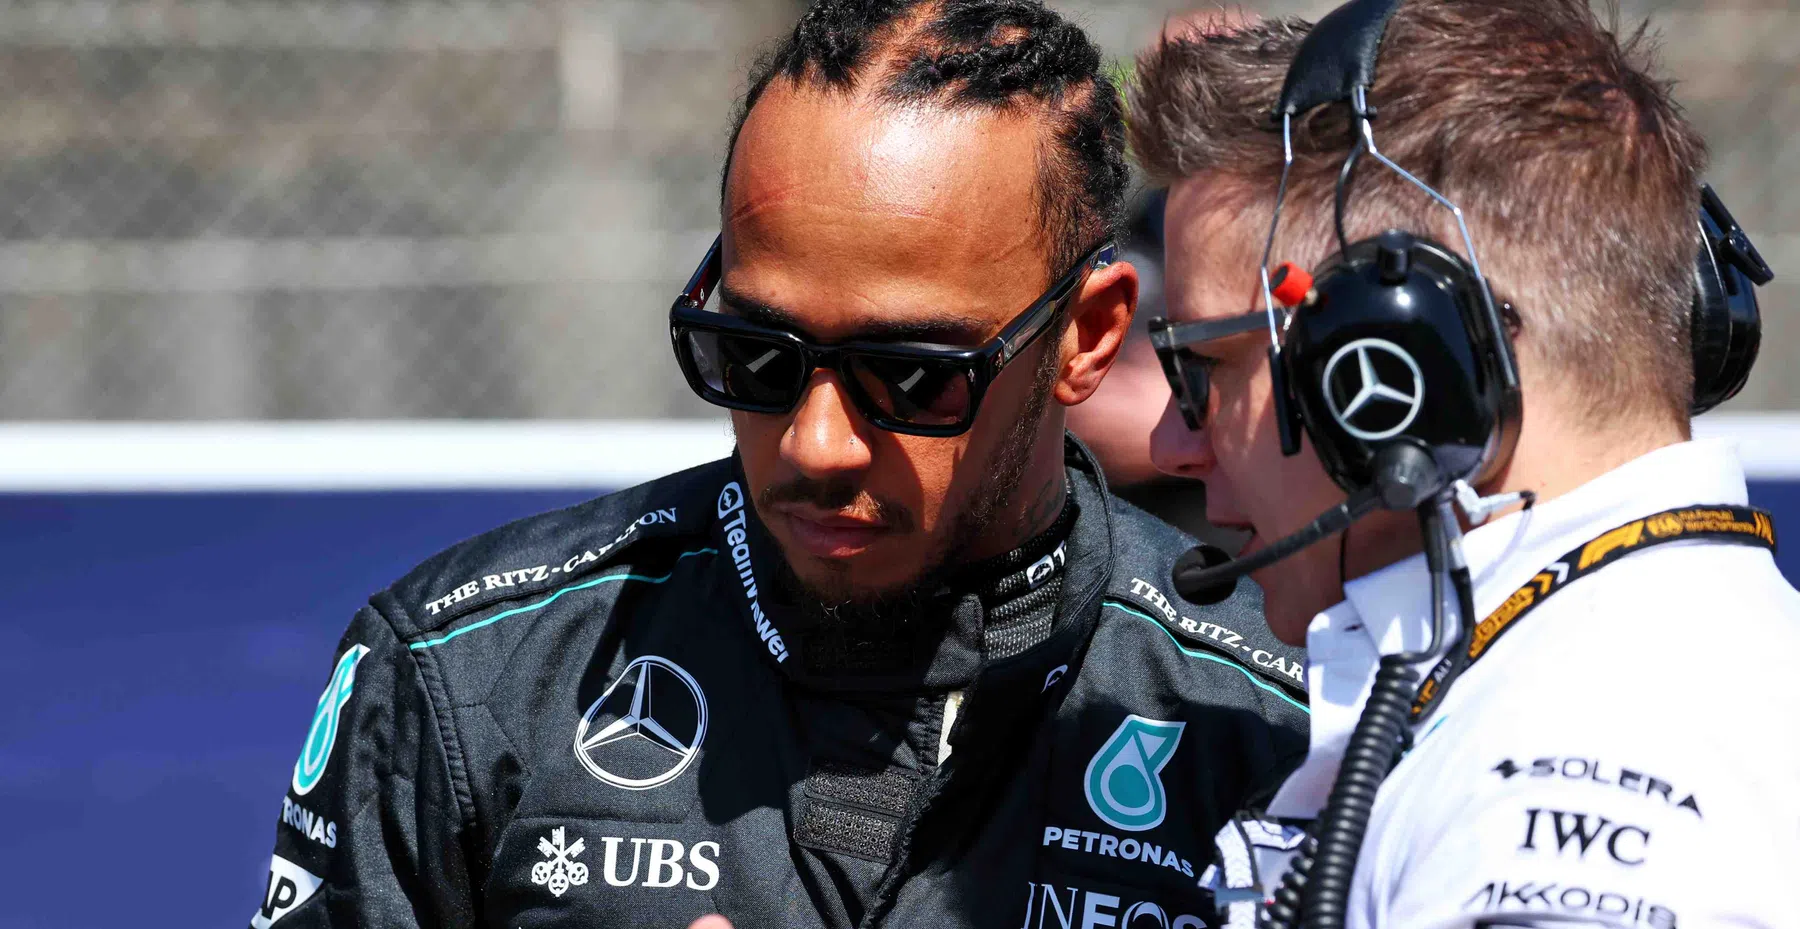 Hamilton responds defensively to question on F1 future